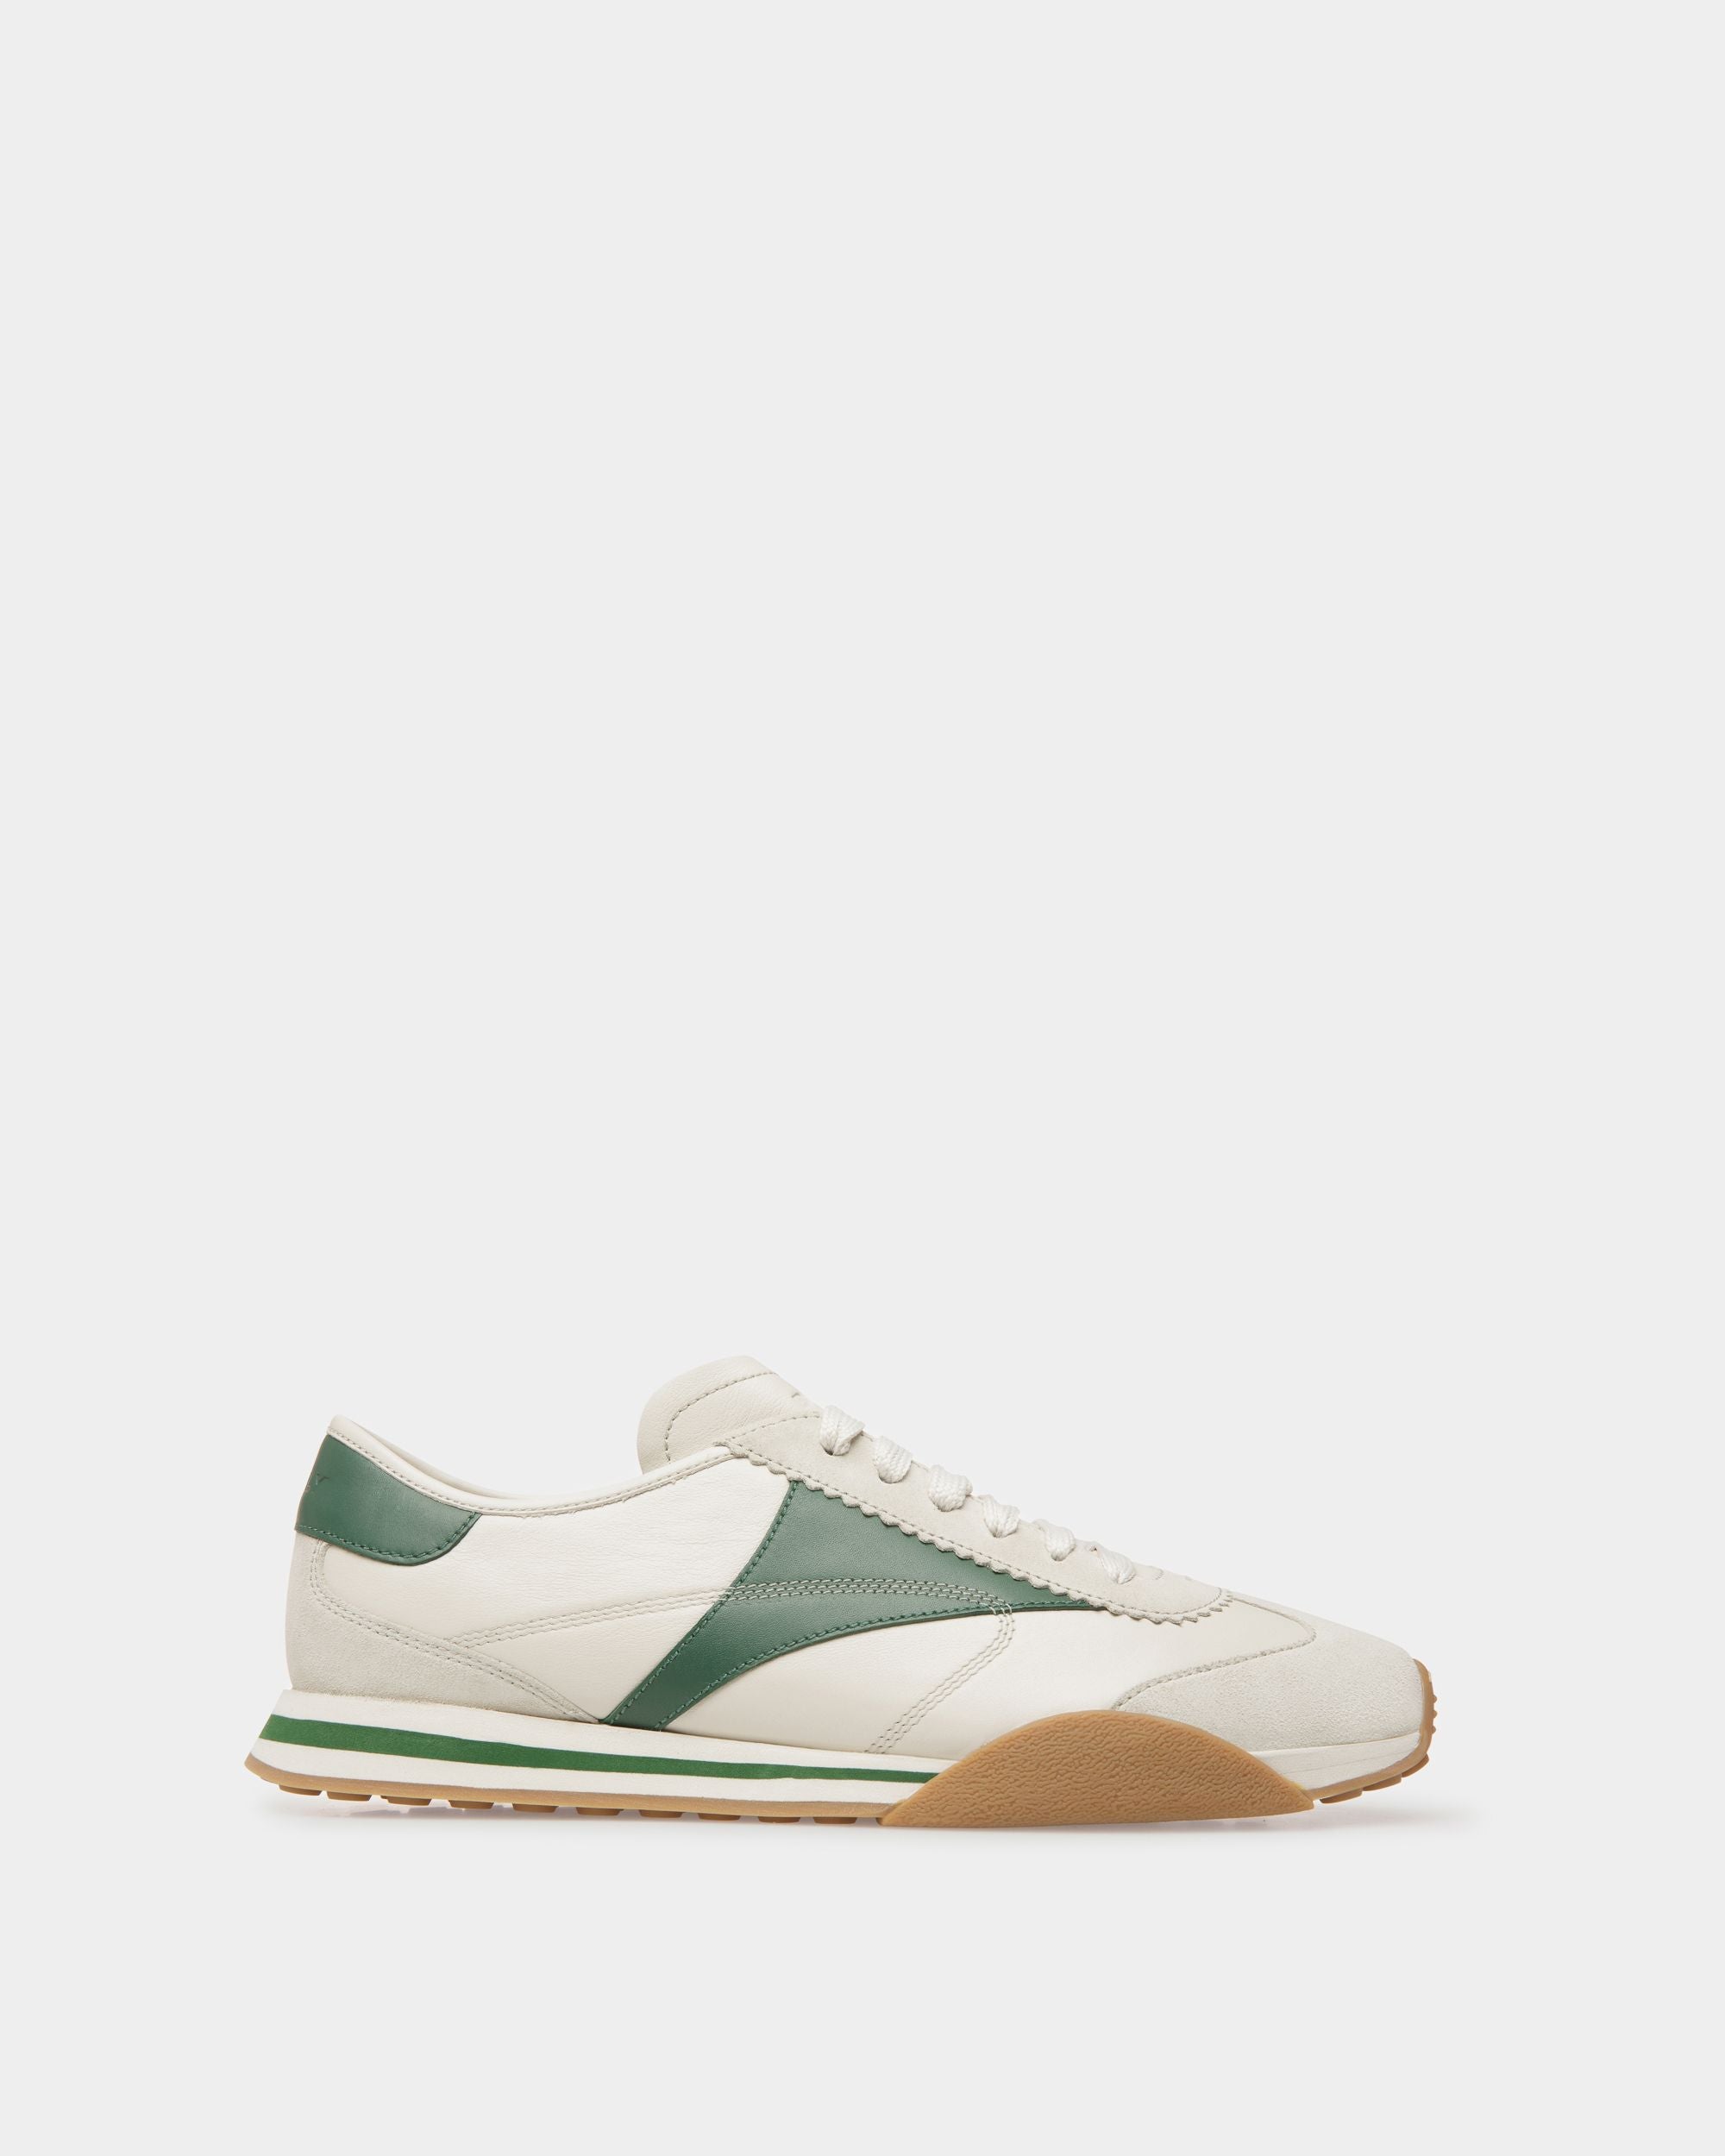 Sonney | Men's Sneakers | Dusty White And Kelly Green Leather| Bally | Still Life Side